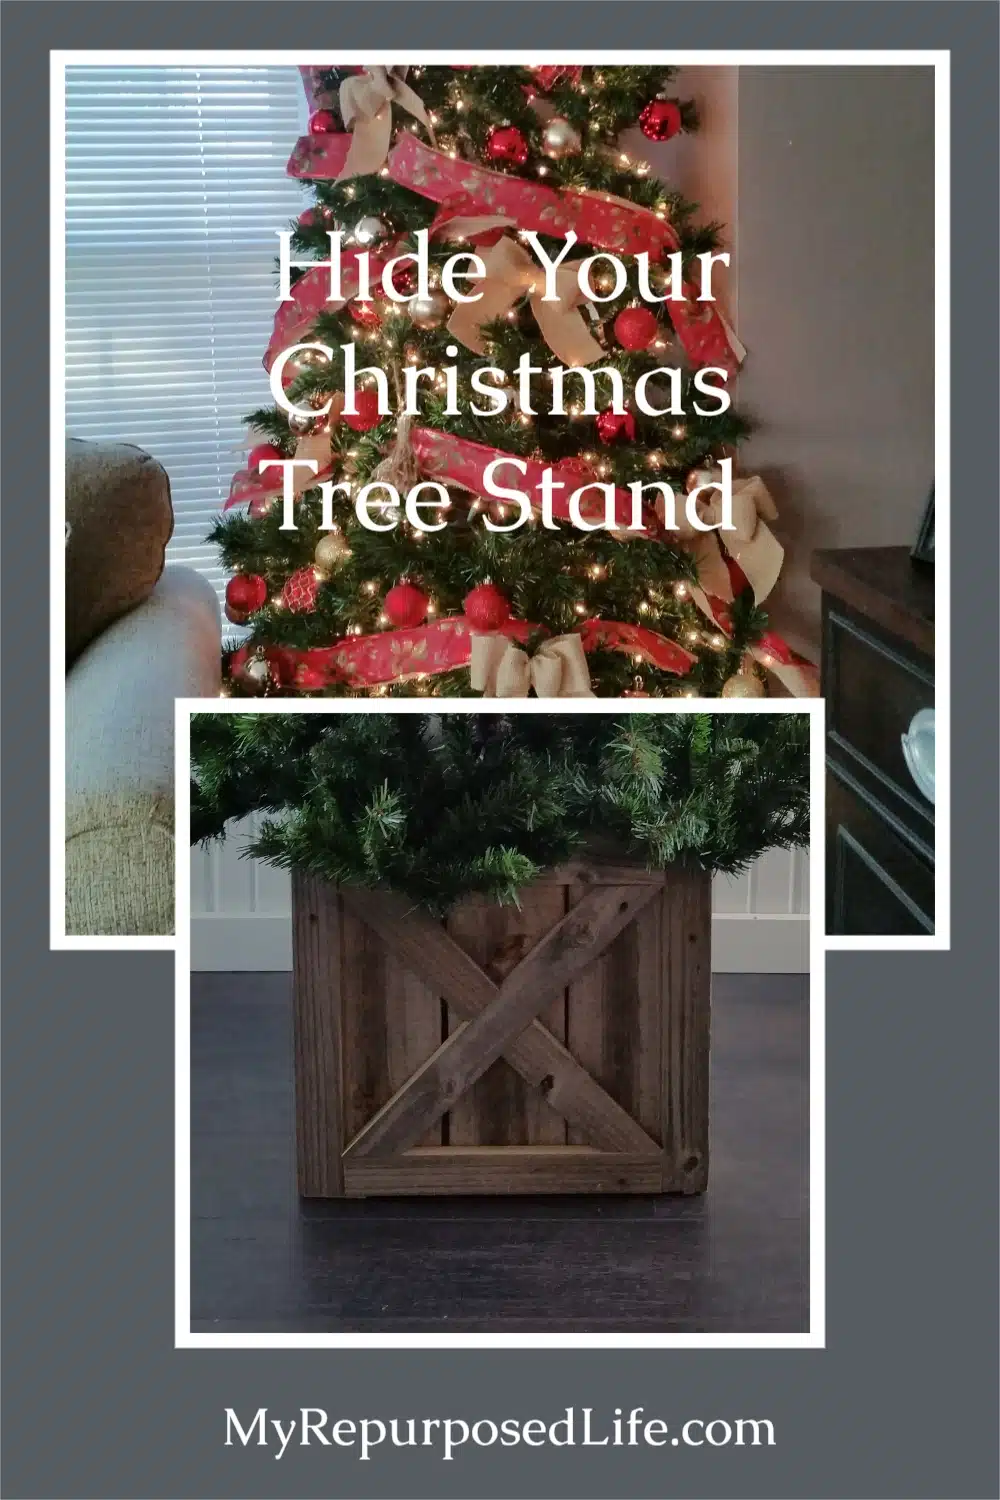 Cover up that Christmas tree stand with a reclaimed rustic box. This easy project will have you smiling as soon as you're finished. Easy Fold Flat for storage. #MyRepurposeLife #Repurposed #Christmas #treestand #diy #reclaimed #easytostore via @repurposedlife